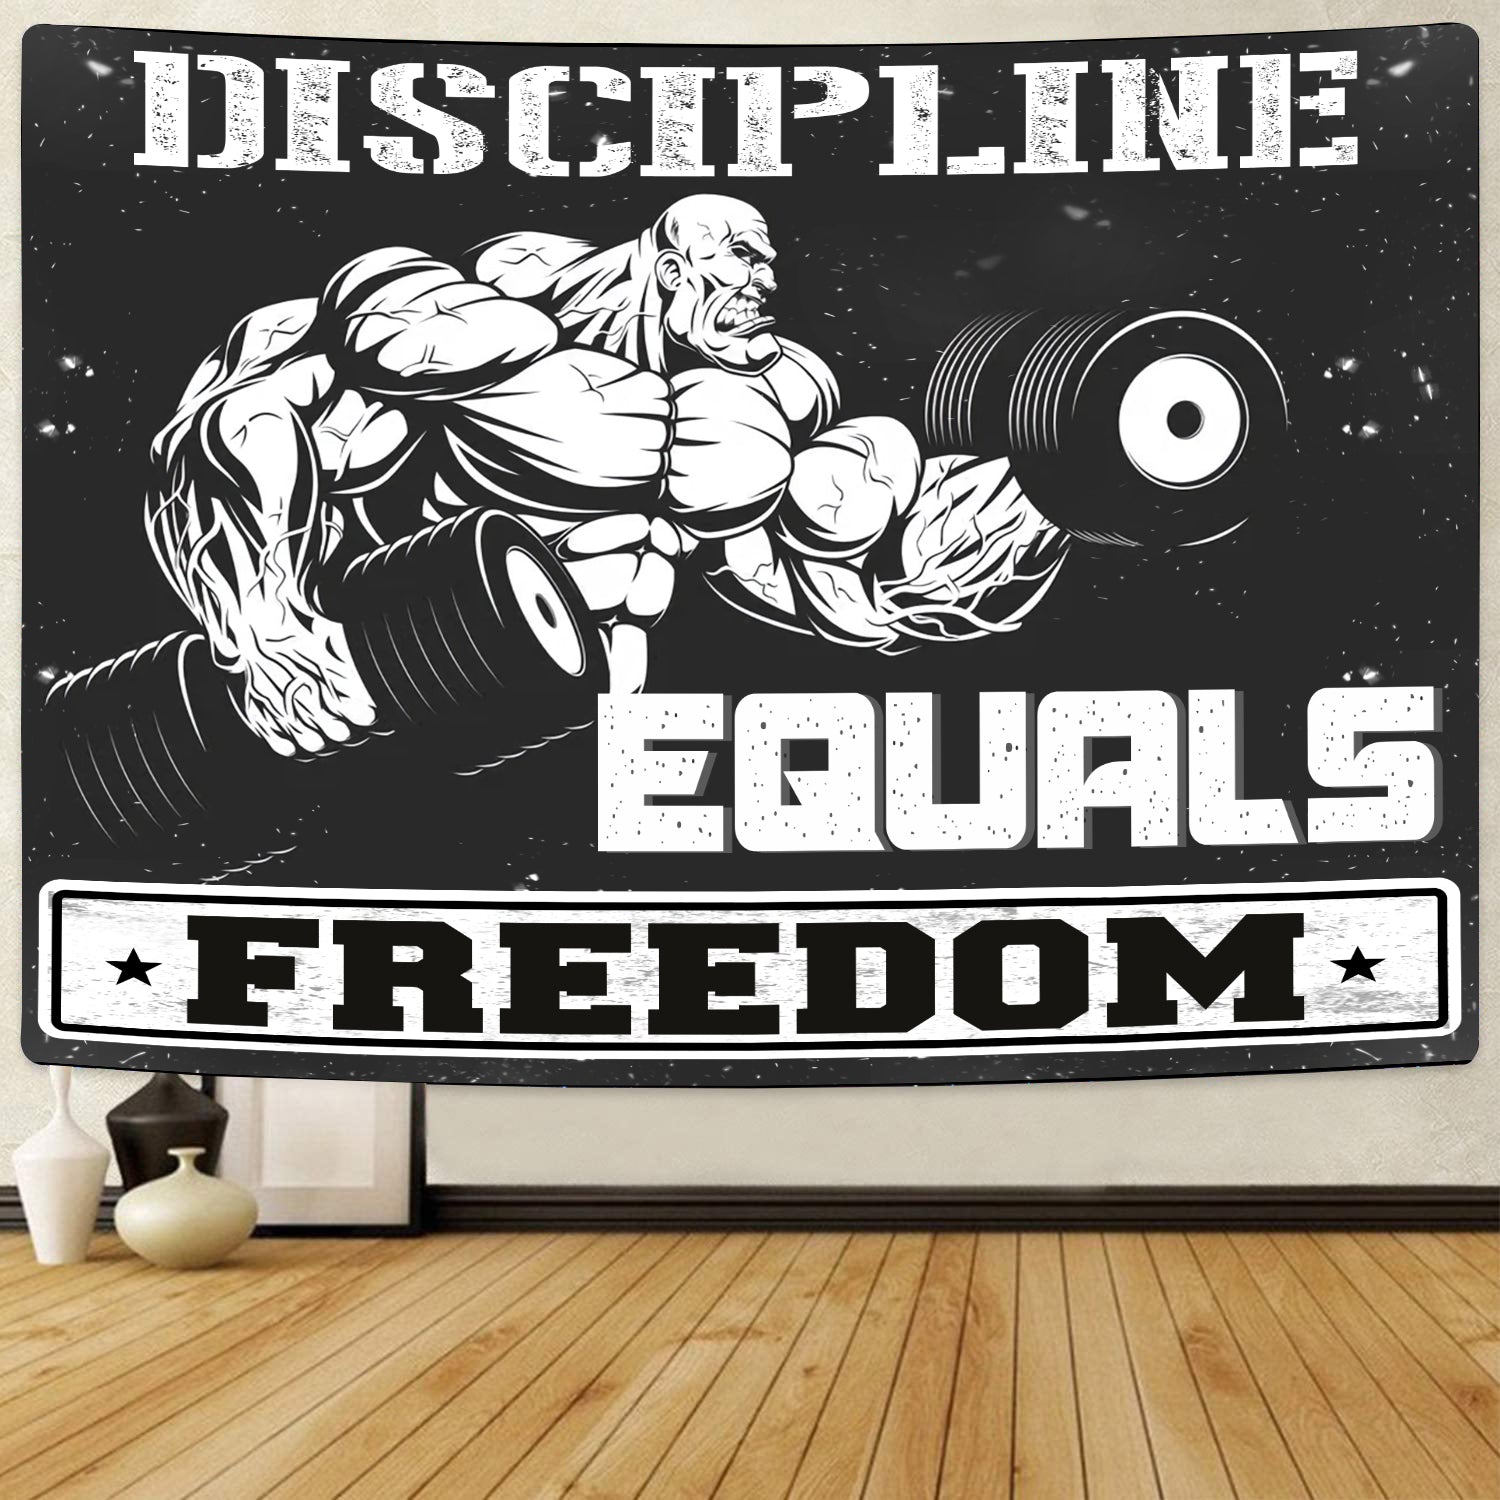 Personalized Home Gym Flags Banner Tapestry Bodybuilding Flags Discipline Equals Freedom 11059